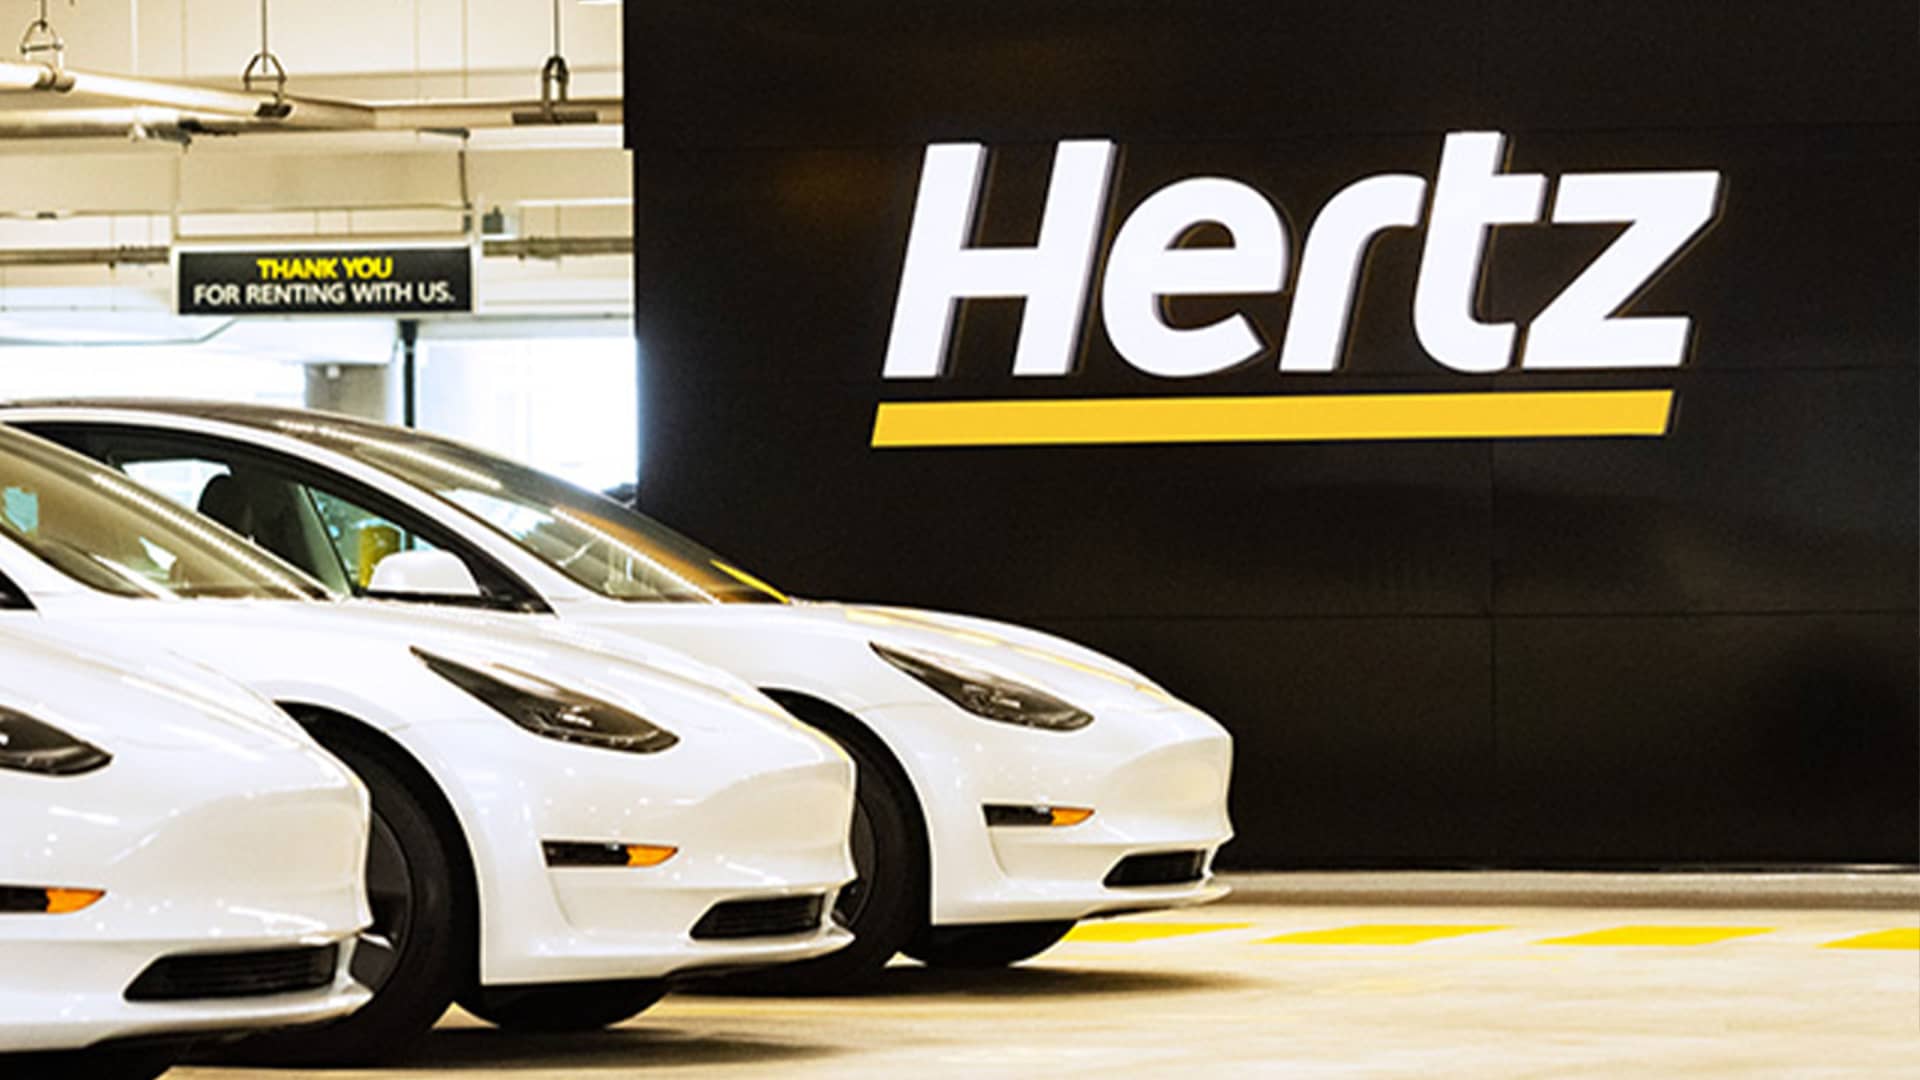 Hertz is bringing thousands of EVs and chargers to the city of Denver in a broad new partnership – CNBC